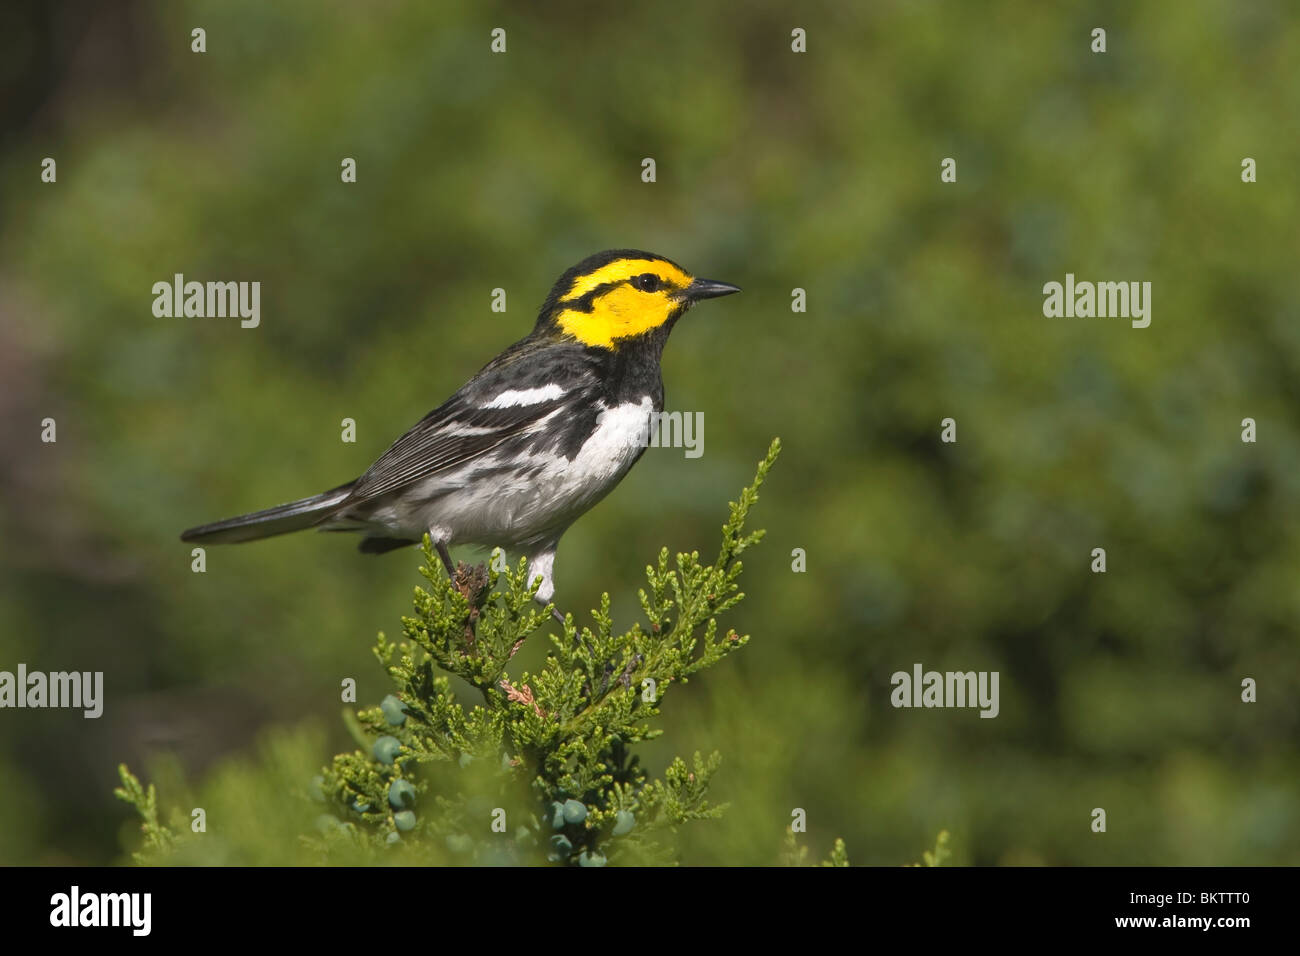 Golden cheeked Warbler perched on Ashe Juniper Tree Stock Photo